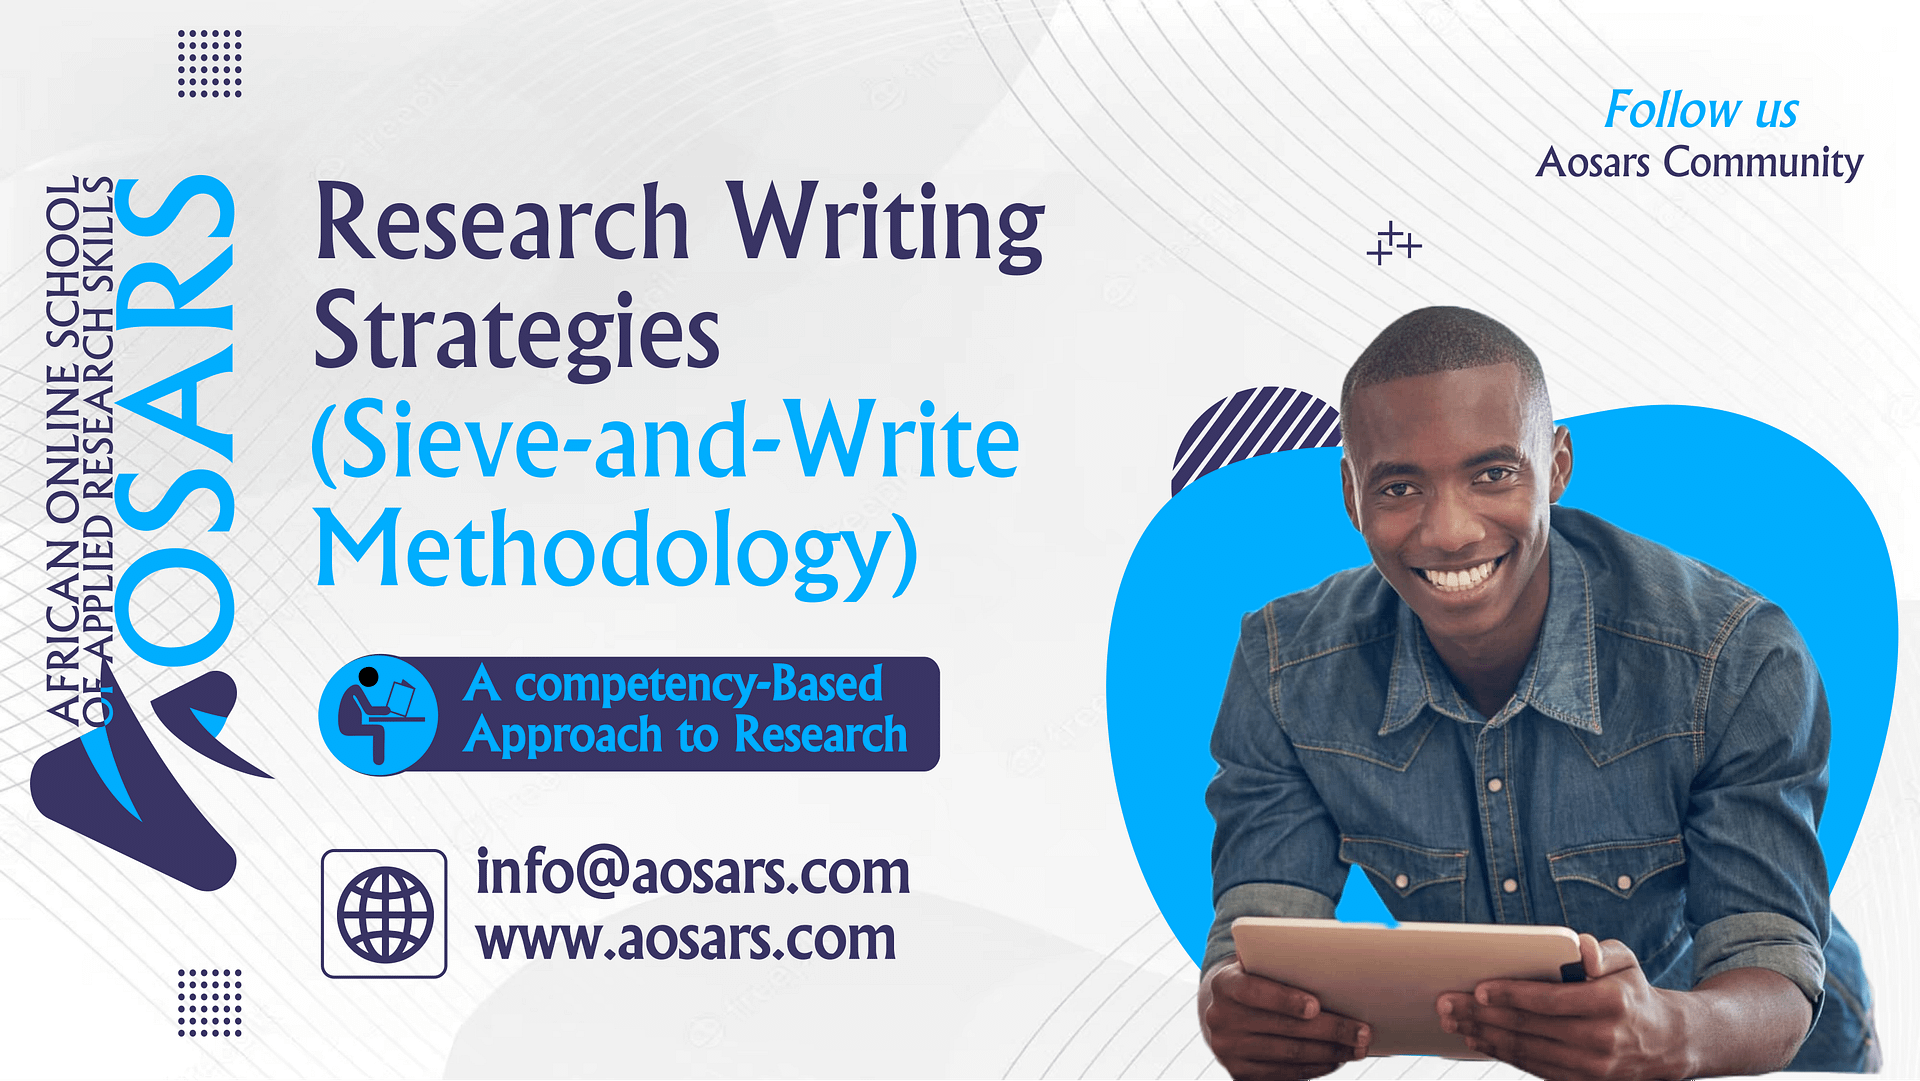 Research Writing Strategies (Sieve-and-Write Methodology)